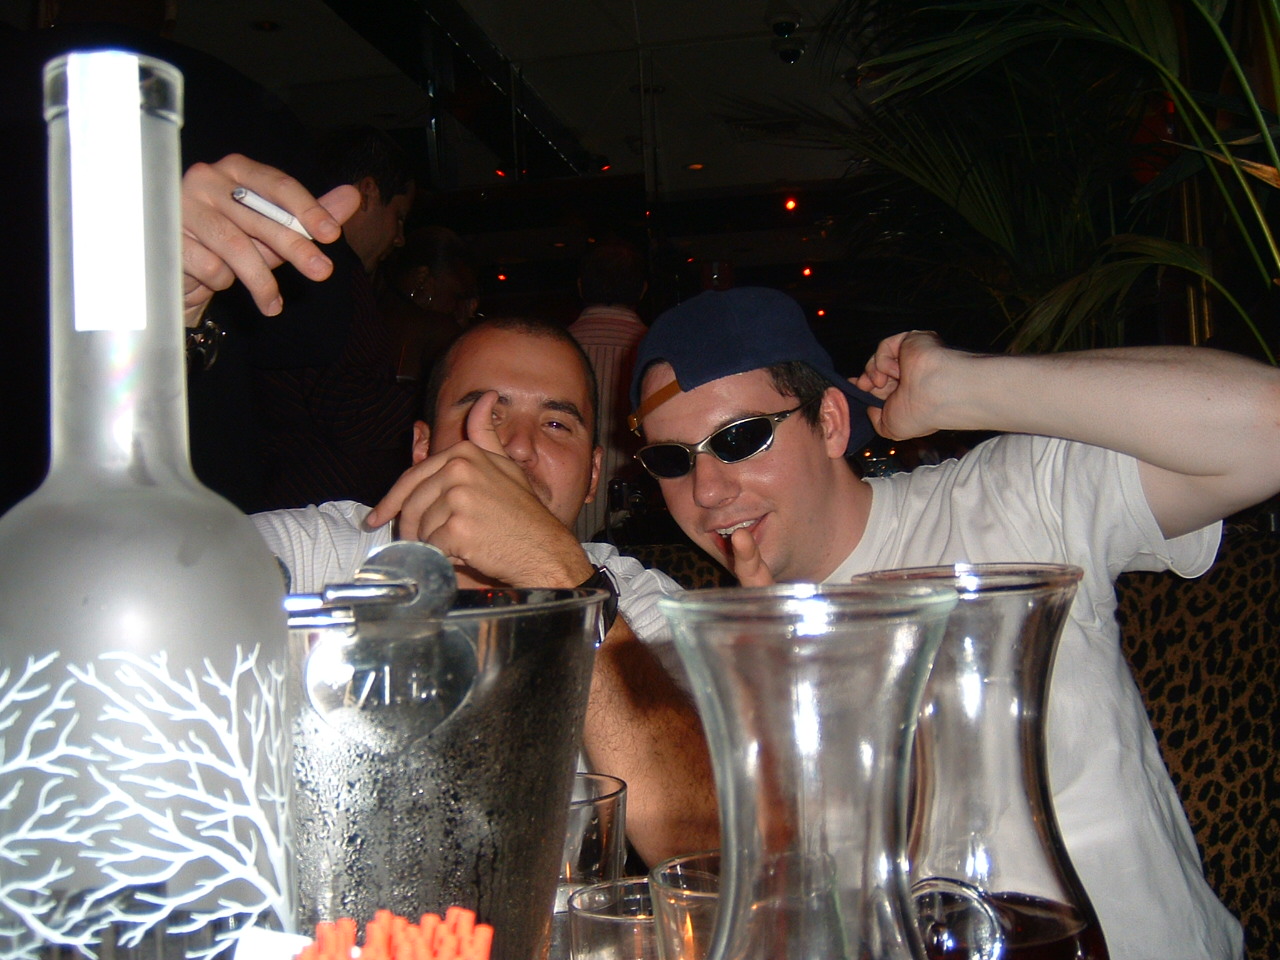 Trent And Tom Partying.jpg